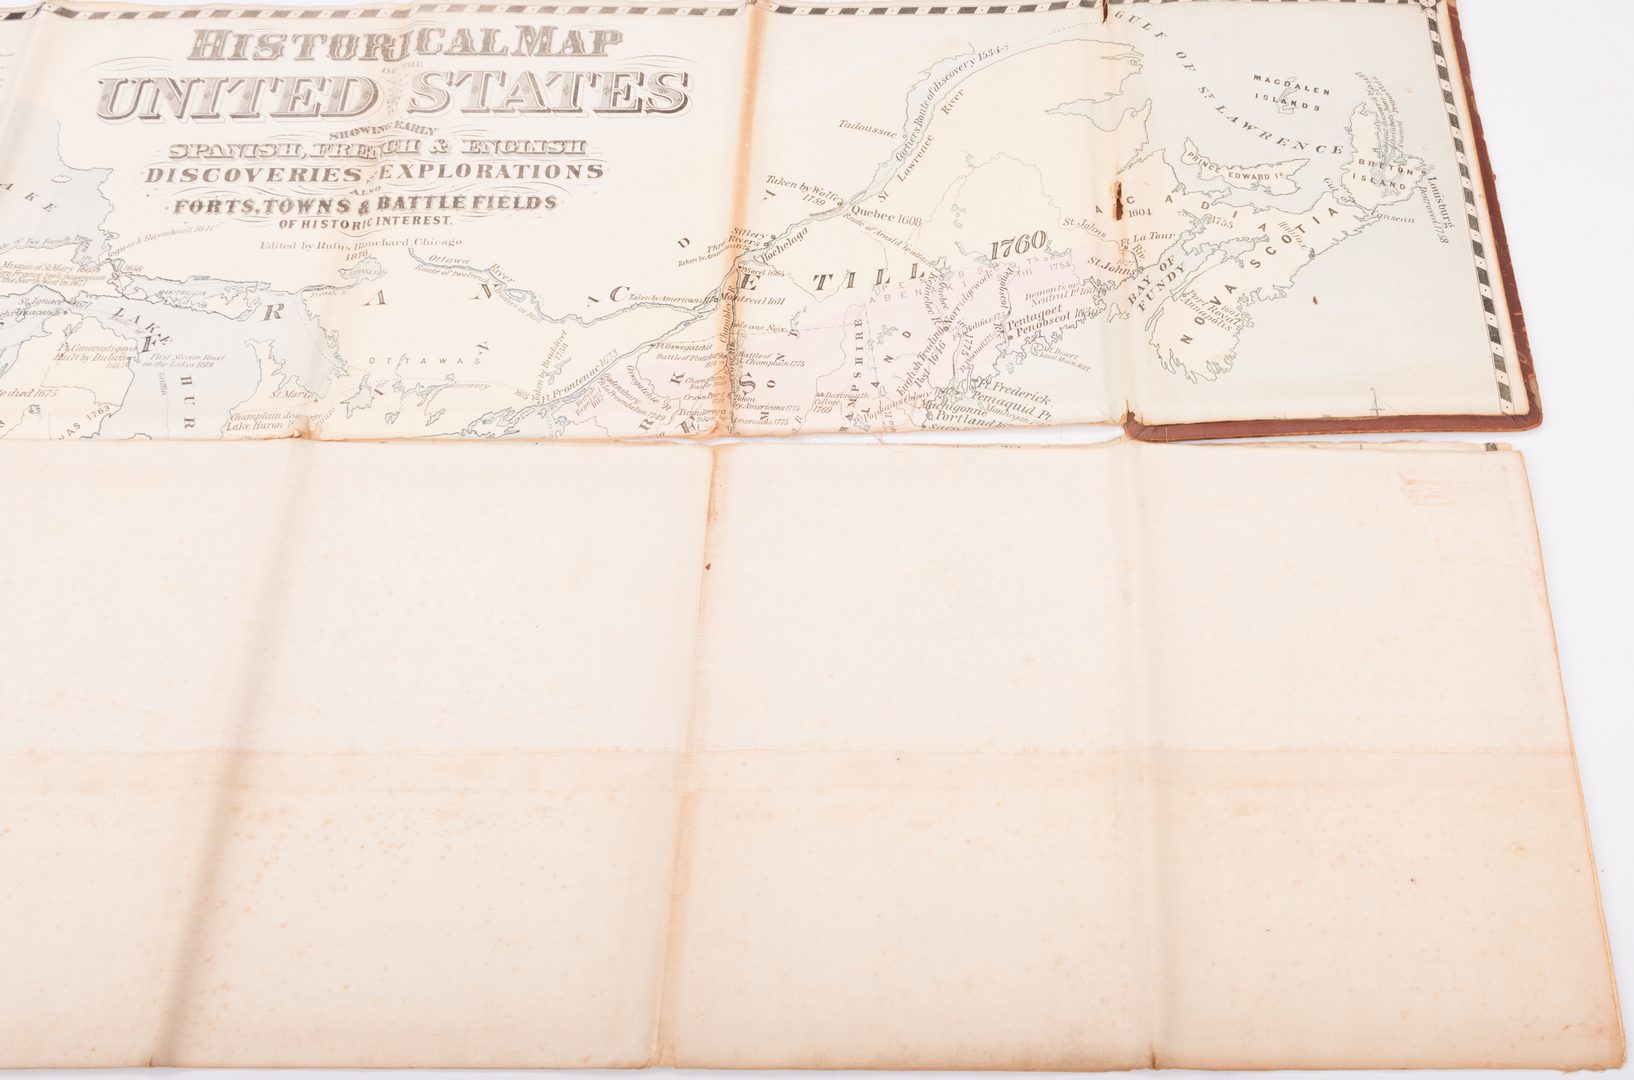 Lot 537: Historical Map Of The United States, R. Blanchard, 1876